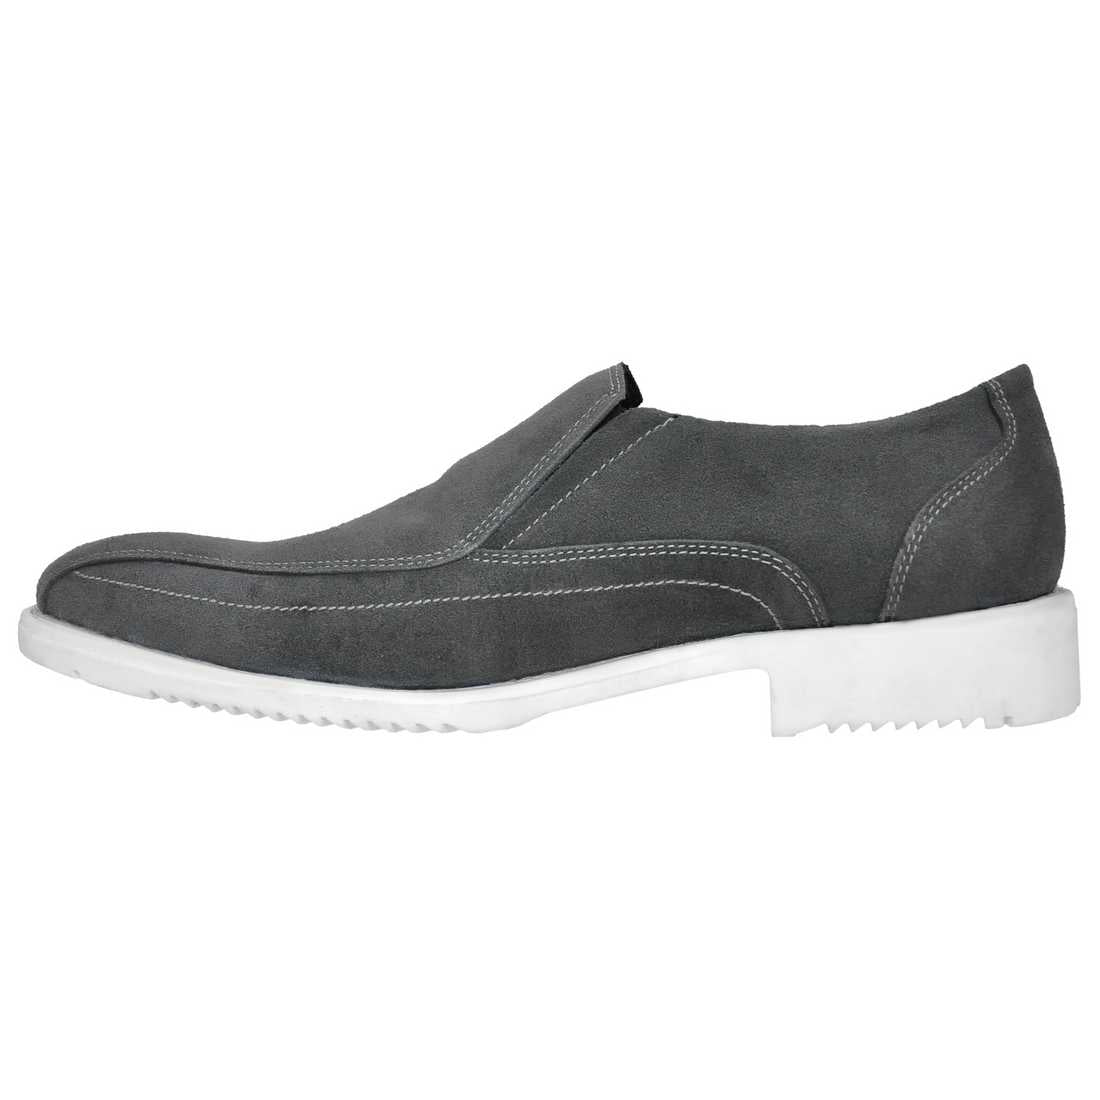 OHM New York American Lifestyle Slip-on Leather Shoes